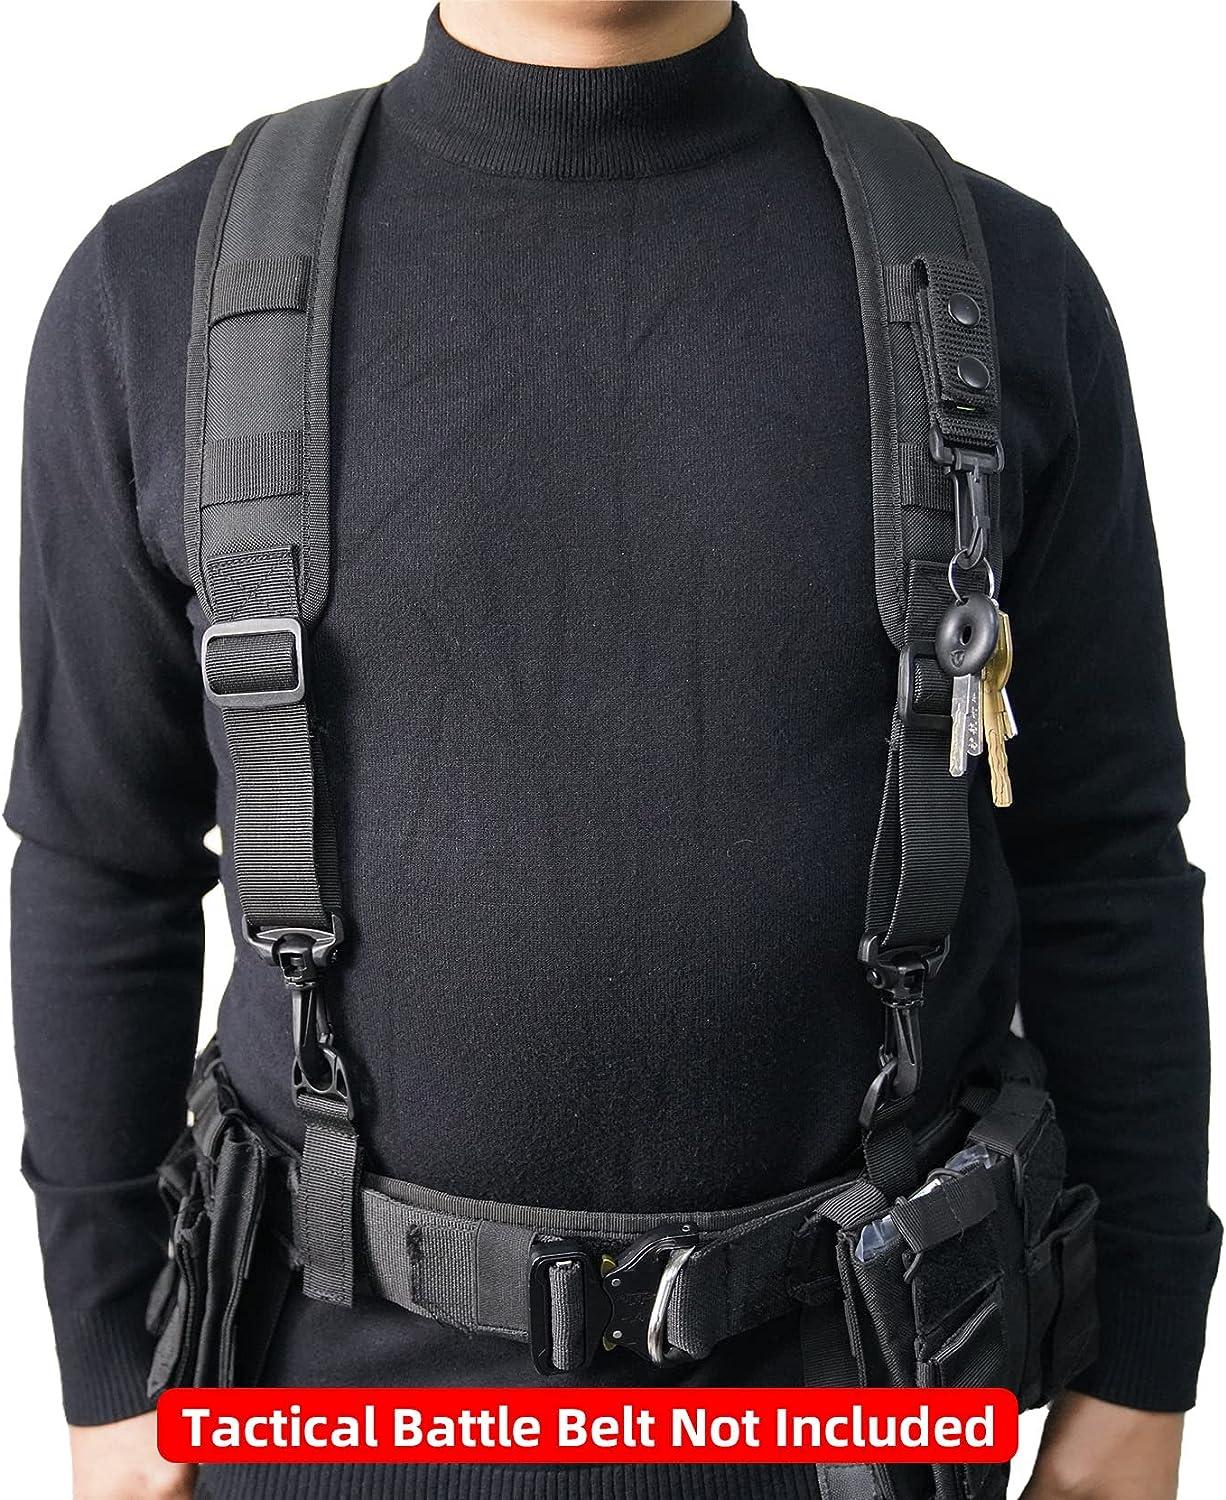 KUNN Tactical Suspenders Law Enforcement Police Harness for Duty Belt with  Padded,Patch and Key Holder,XL X-Large size for 5'9 to 6'4 tall